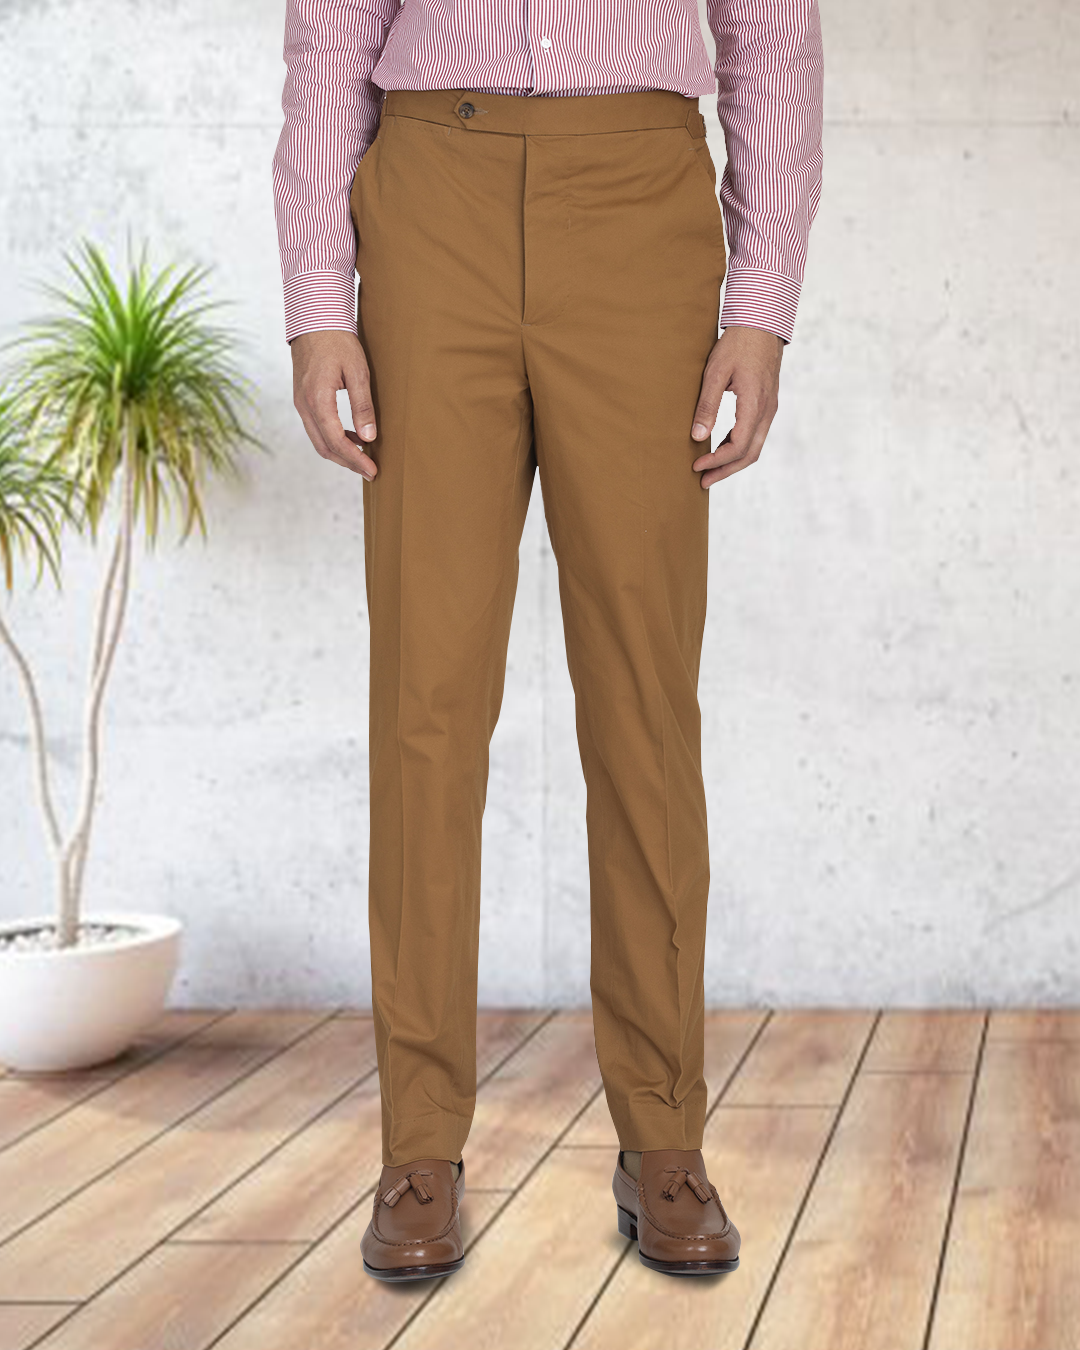 Bottom view of model wearing custom Genoa Chino pants for men by Luxire in copper